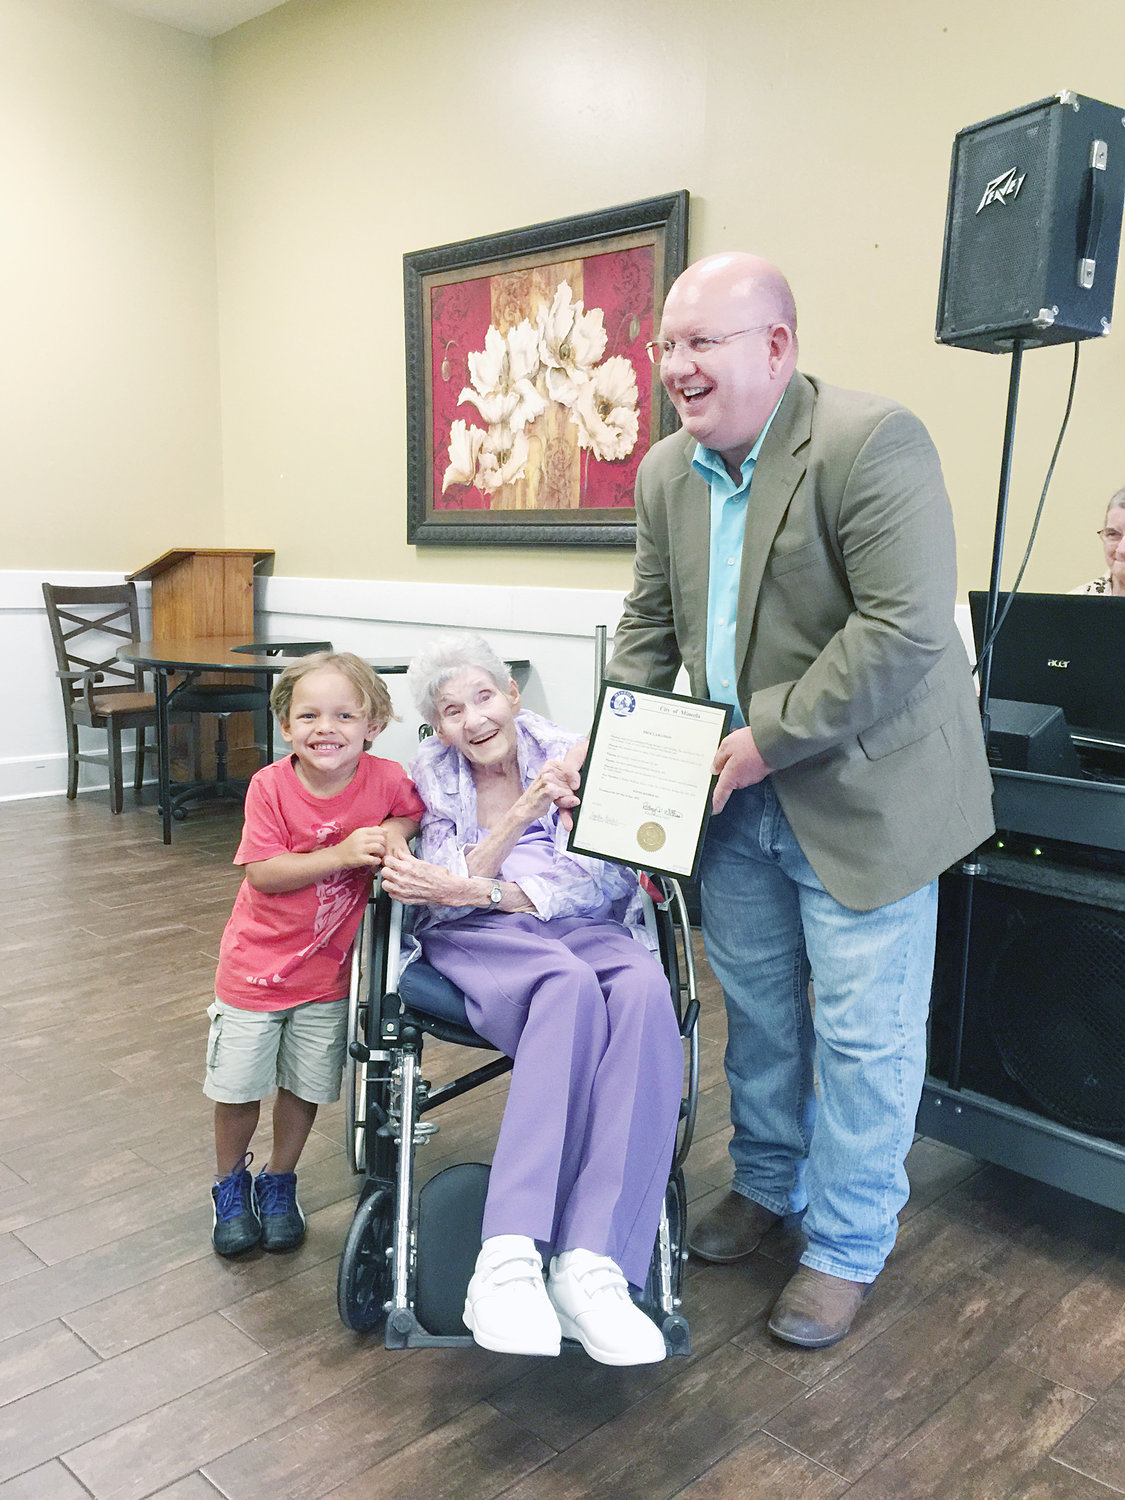 Winnie Booher originally from Grandview now resides in Wood Memorial Nursing Home and calls Mineola home. She turned 100 on July 31 and was honored by the City of Mineola at her birthday celebration. Mayor Pro-tem Kevin White, far right, proclaimed July 26 as Winnie Booher Day in the City of Mineola! Pictured with Ms. Booher is Elijah Coffman. His grandma was caregiver to Winnie for two years. Winnie helped care for him and a special bond was formed from the start. He still visits Winnie and when she sees him her face lights up! (Photo courtesy Stacey Hays)